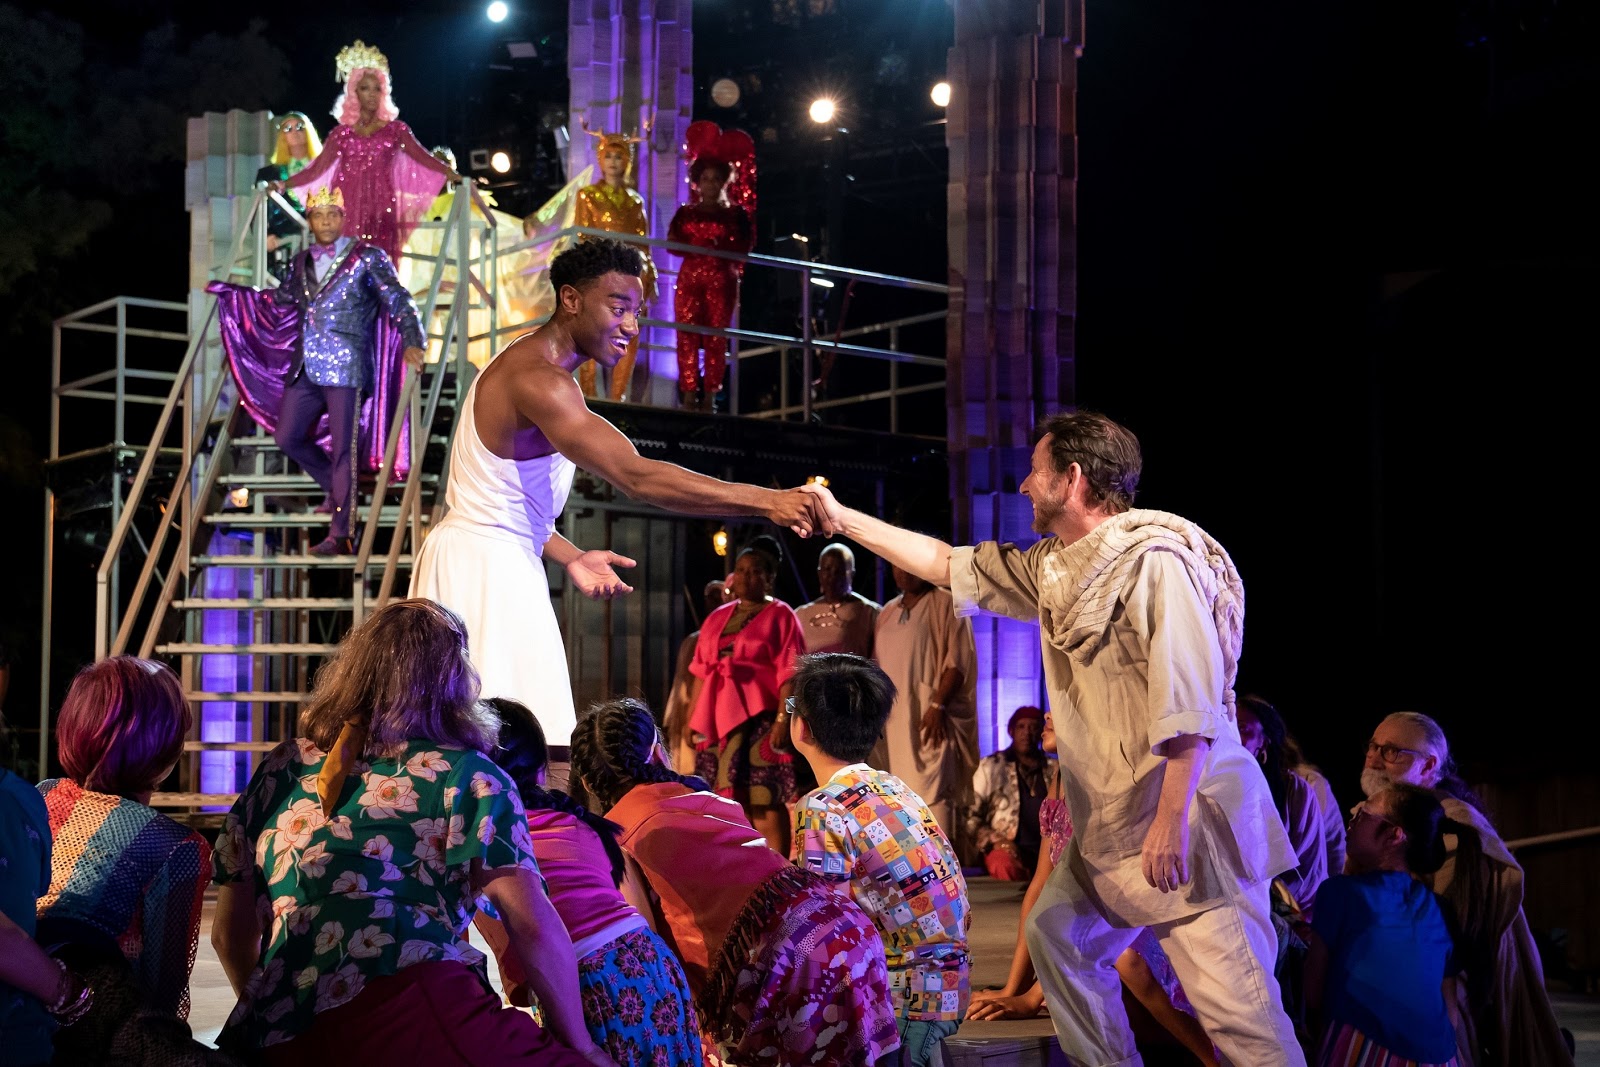 Jelani Alladin (center) and the company of The Public Theater’s free Public Works musical adaptation of Hercules, with music by Alan Menken, lyrics by David Zippel, book by Kristoffer Diaz, choreography by Chase Brock, and directed by Lear deBessonet, running at the Delacorte Theater. Photo credit: Joan Marcus.
